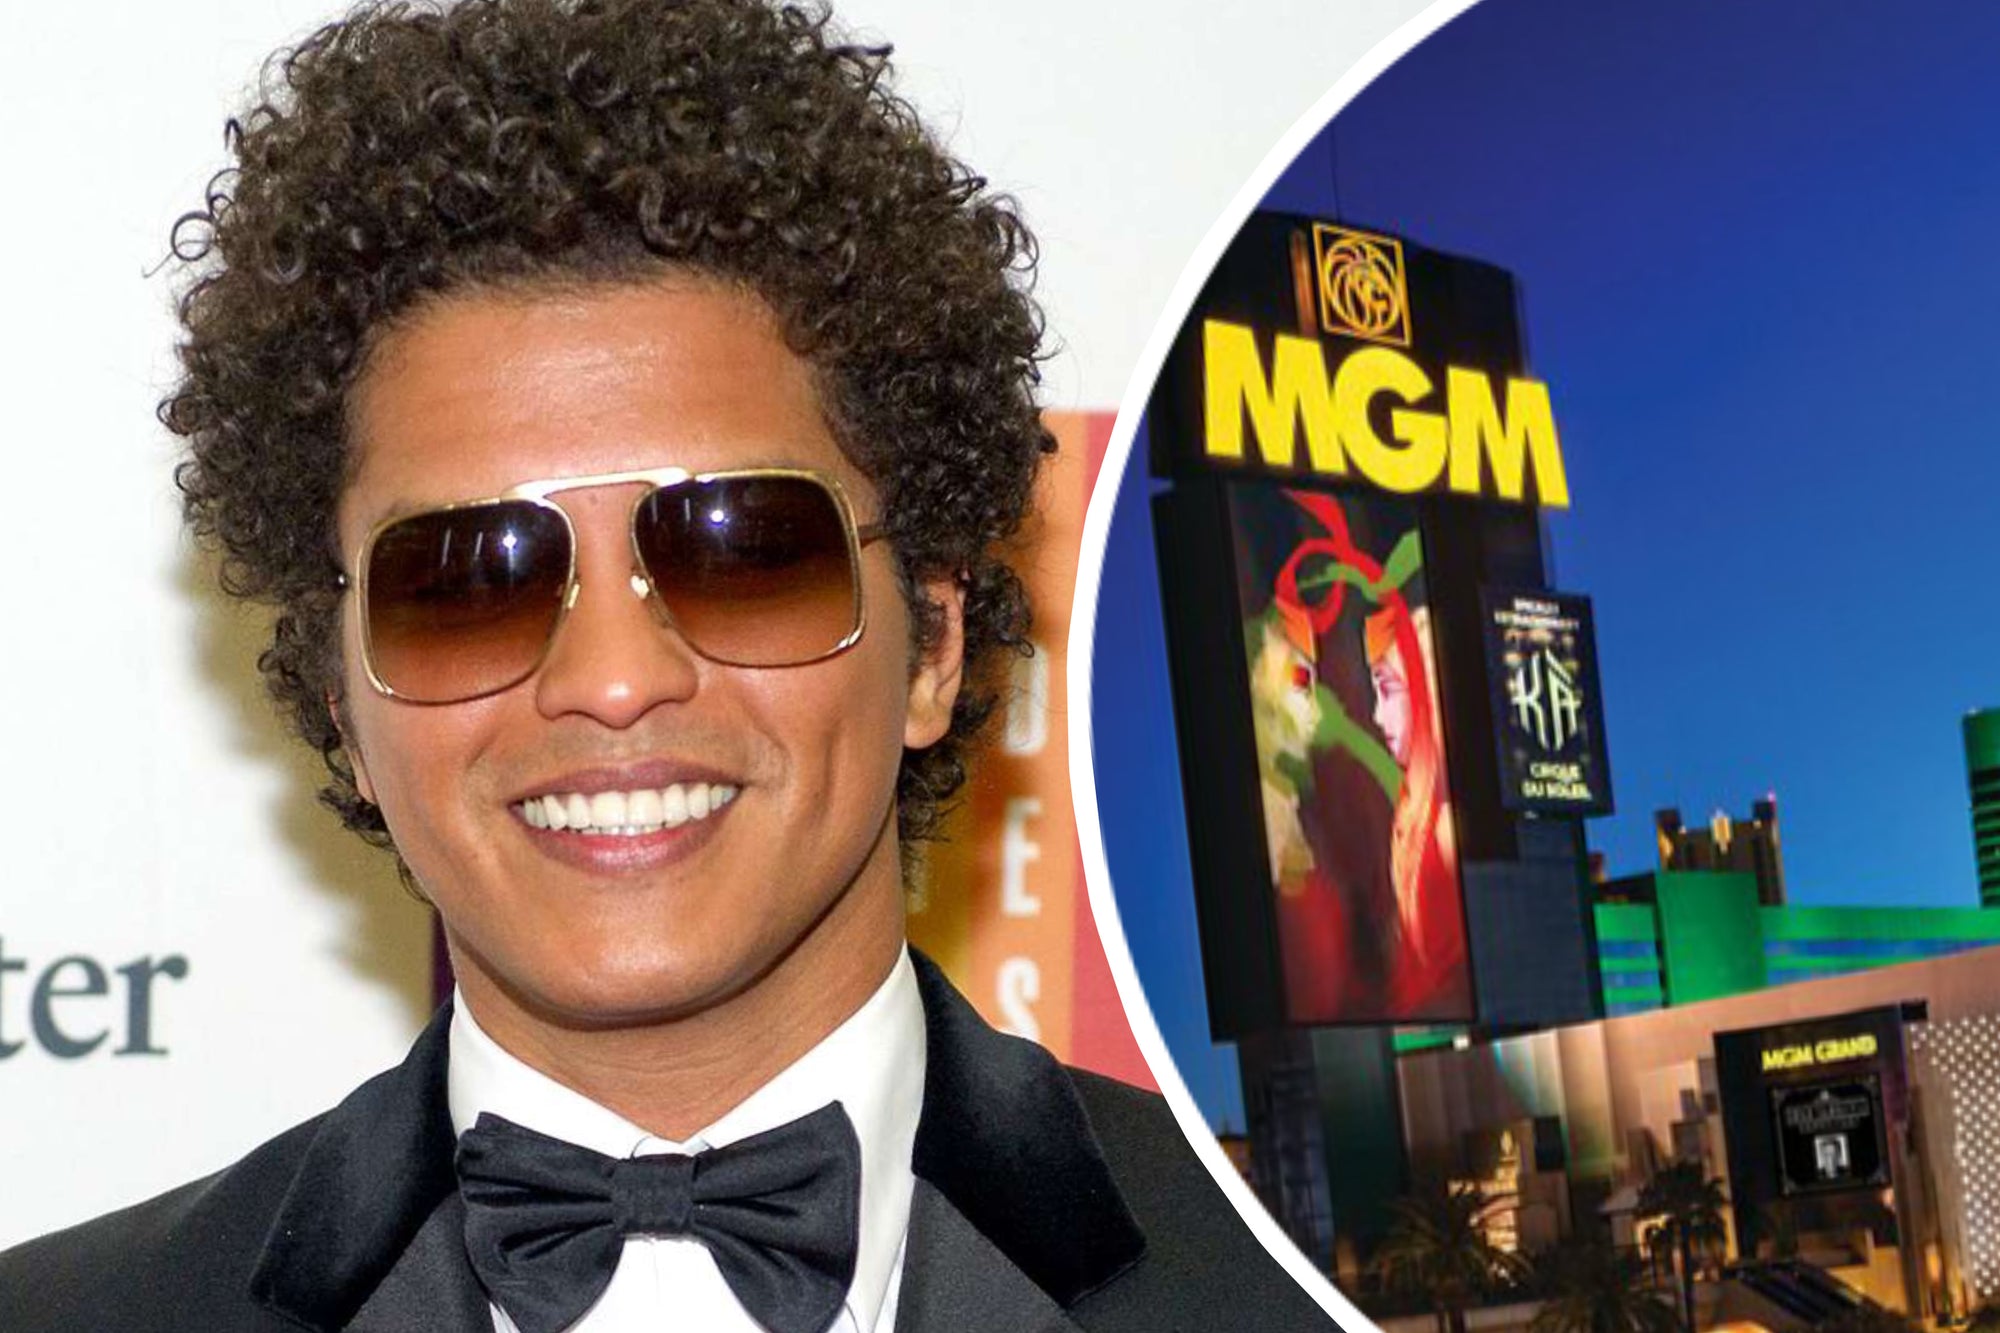 Bruno Mars Reportedly Faces $50 Million Gambling Debt With MGM Casino